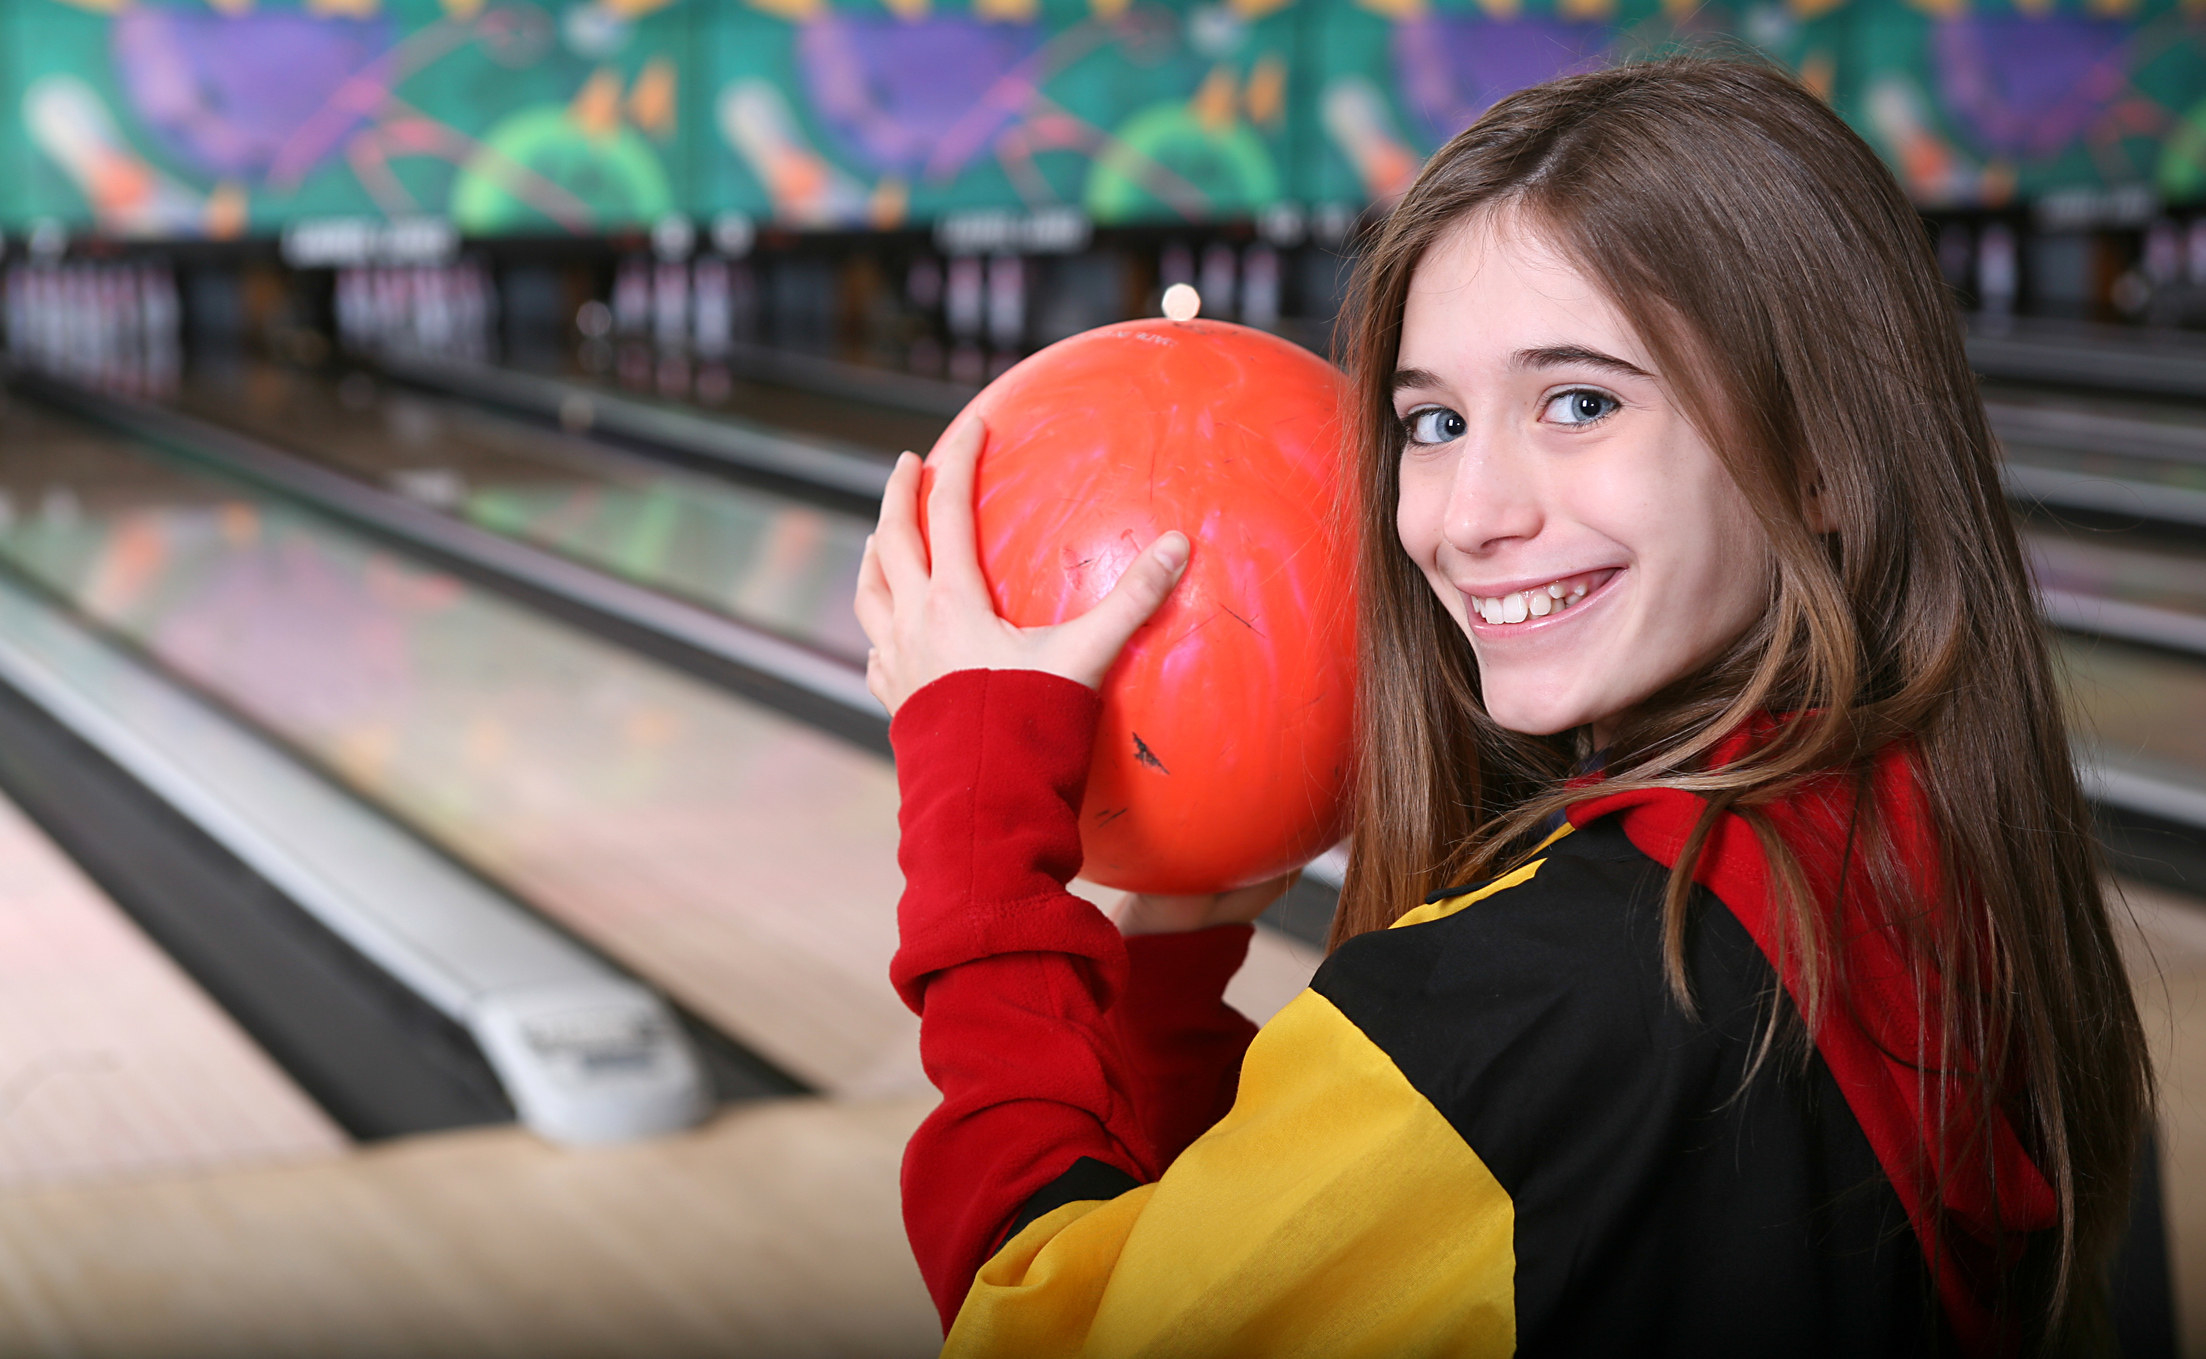 A girl at a bowling alley holding a bowling ball and smiling